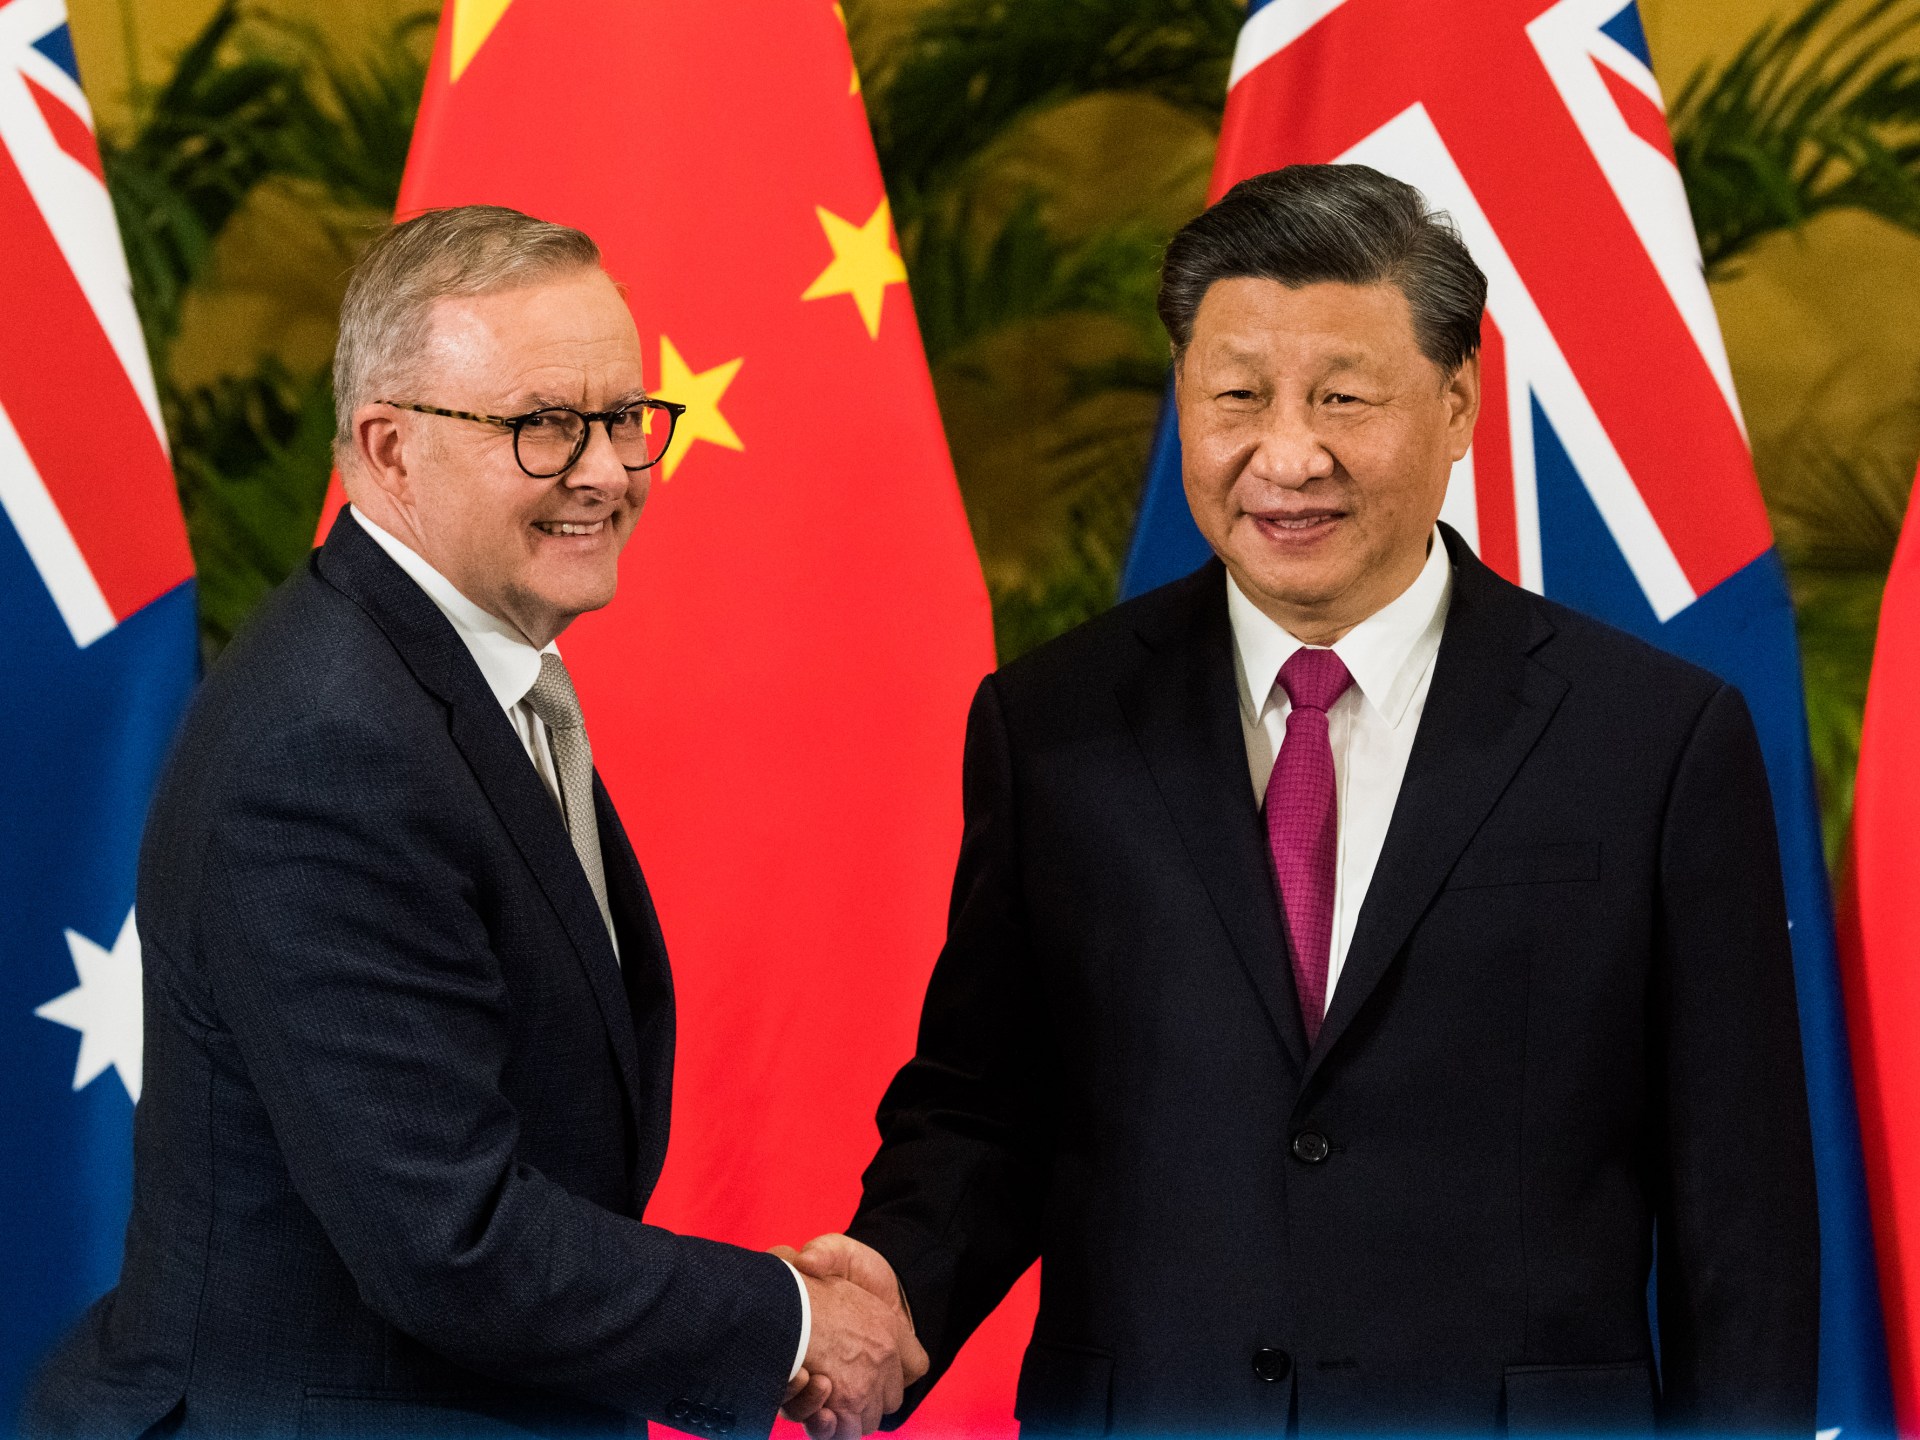 Australia’s Albanese heads to China touting ‘consistent, steady’ engagement